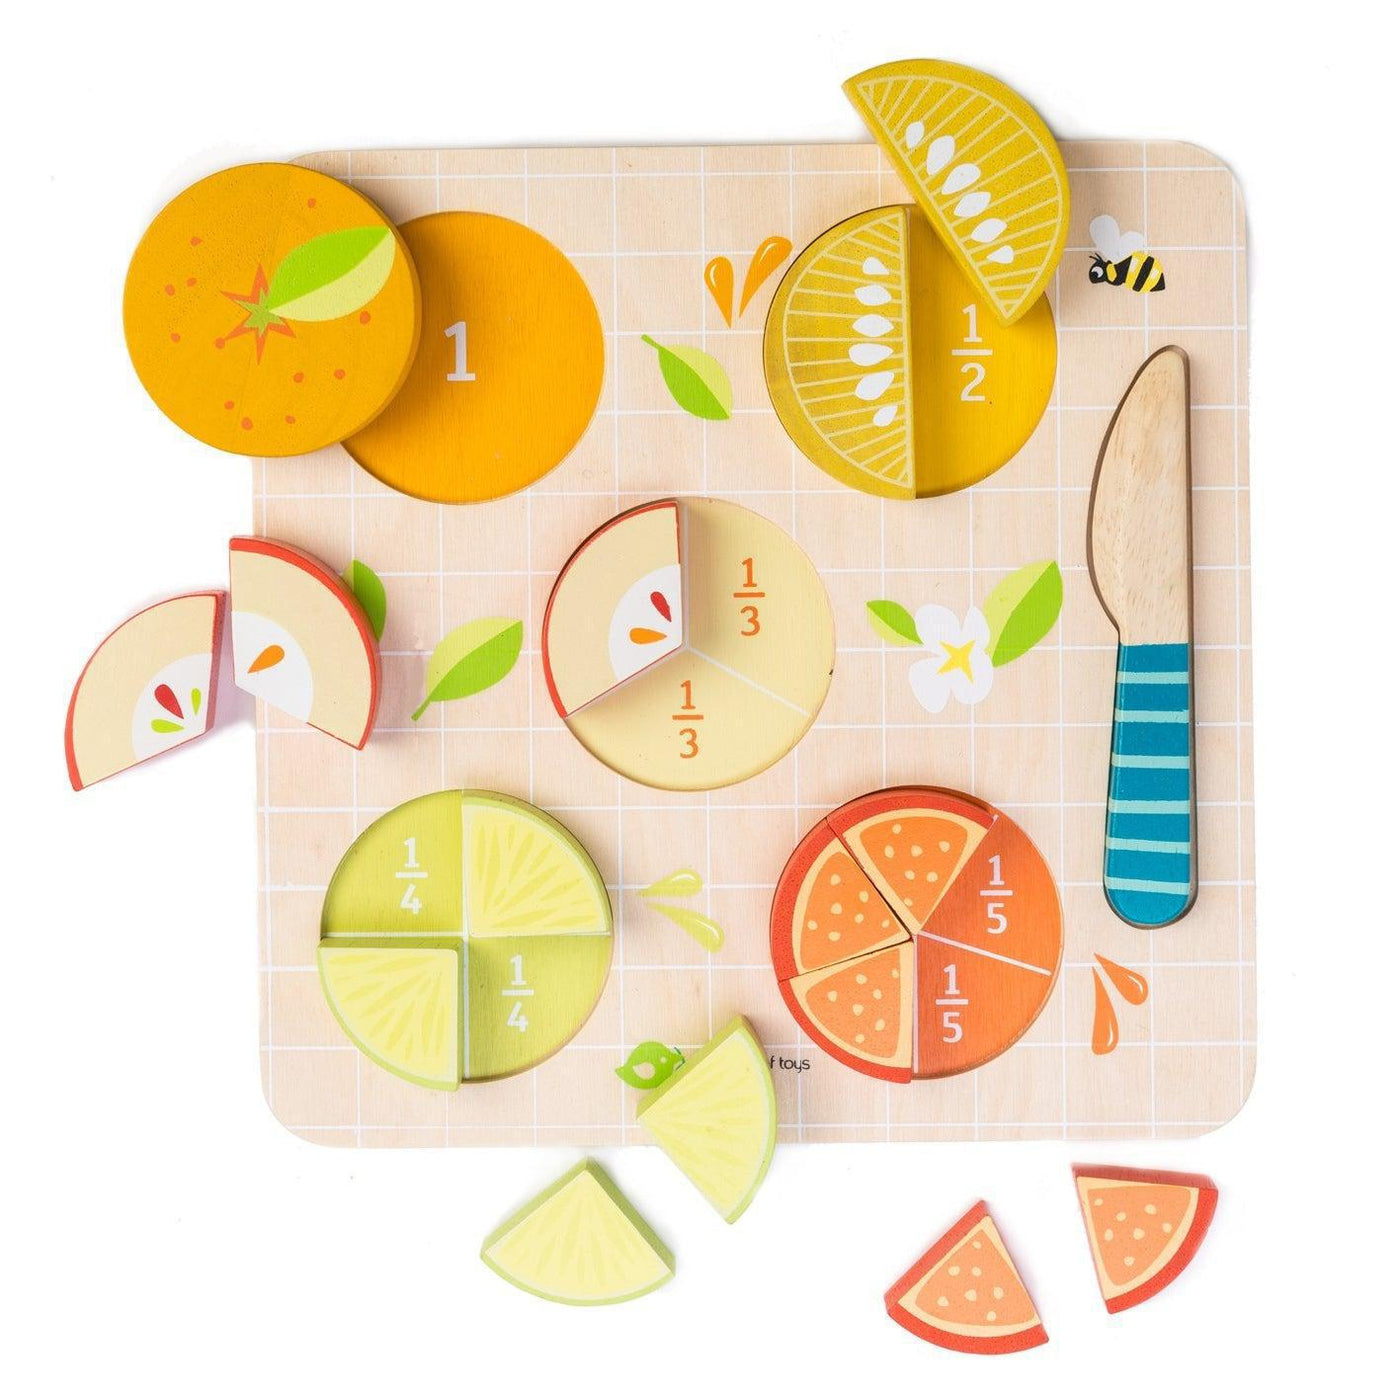 Tender Leaf Toys Citrus Fractions A Learning Maths Game